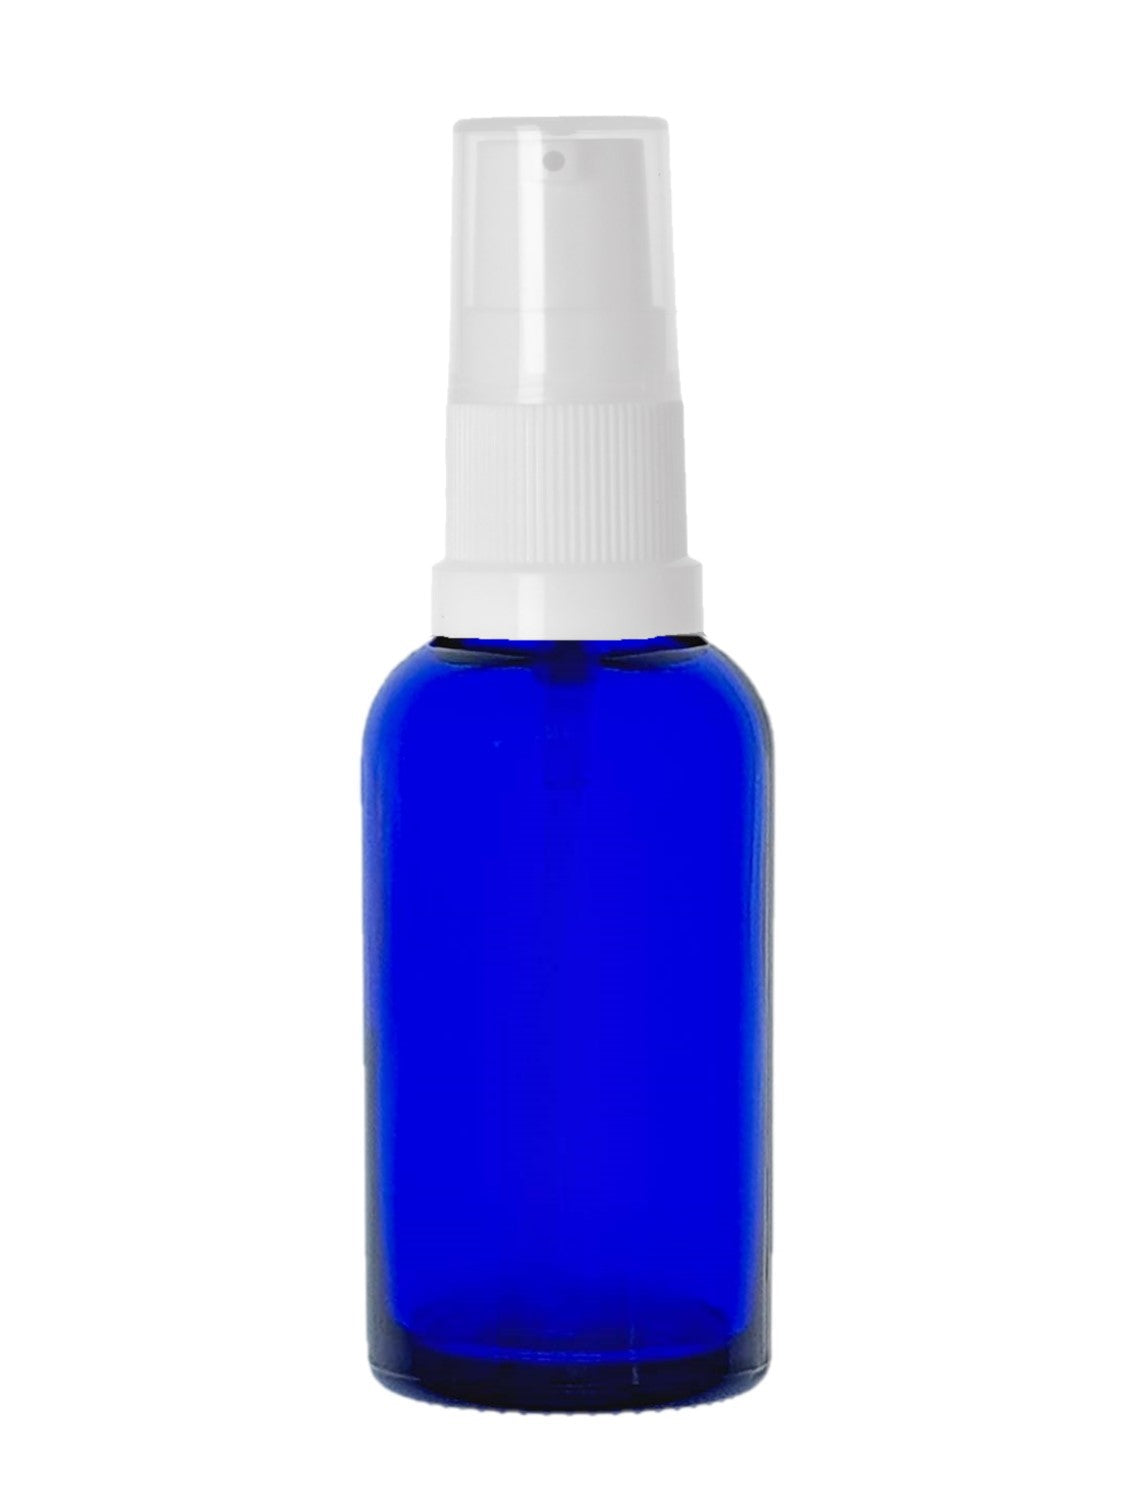 30ml Blue Glass Bottles with White Treatment Pump and Clear Overcap